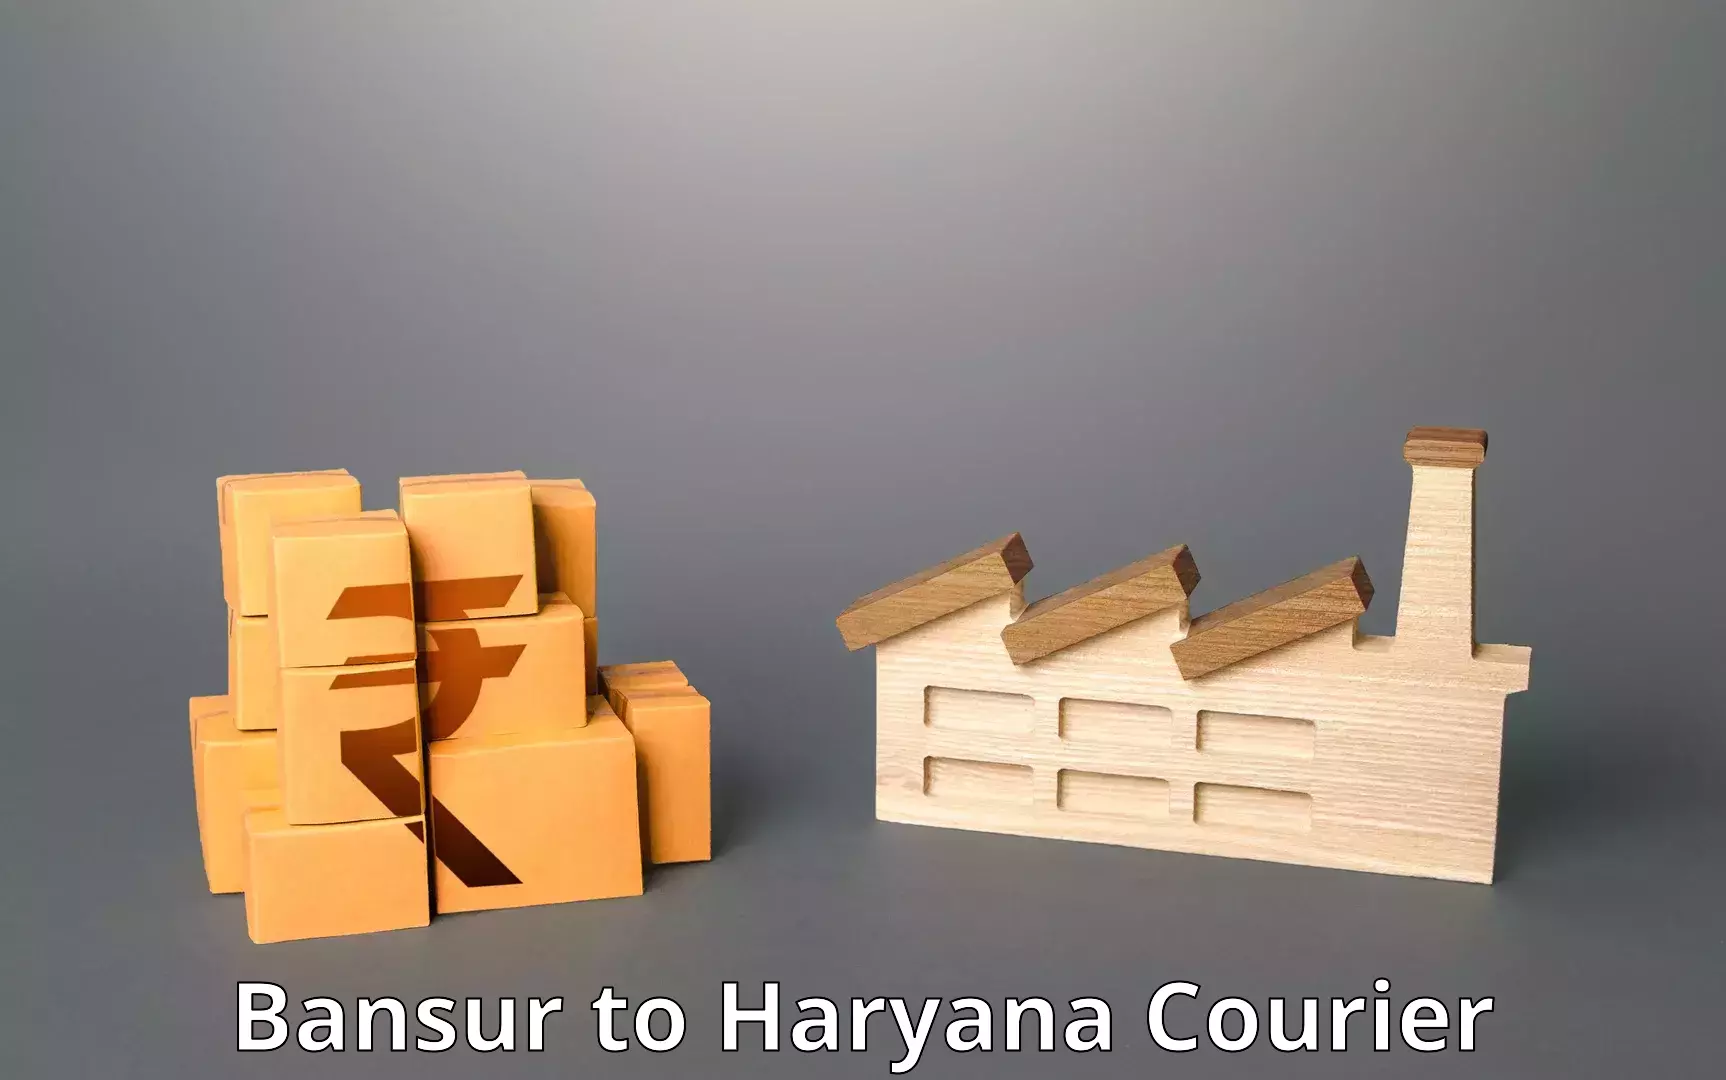 Pharmaceutical courier Bansur to NCR Haryana